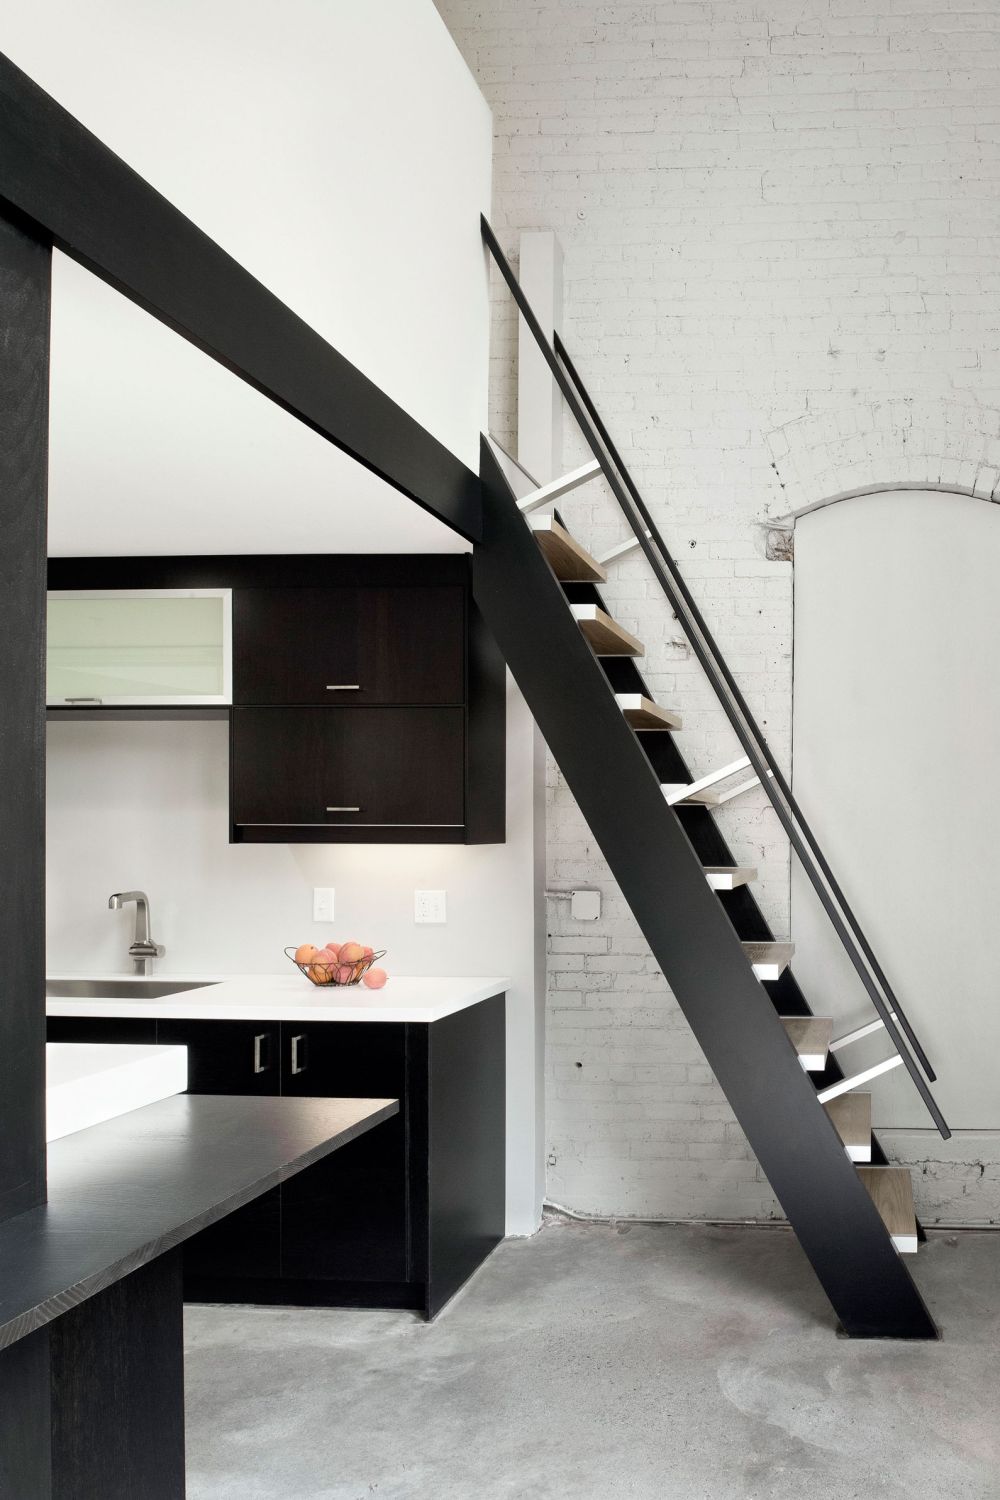 L-shaped stairs are attractive and take up less space.